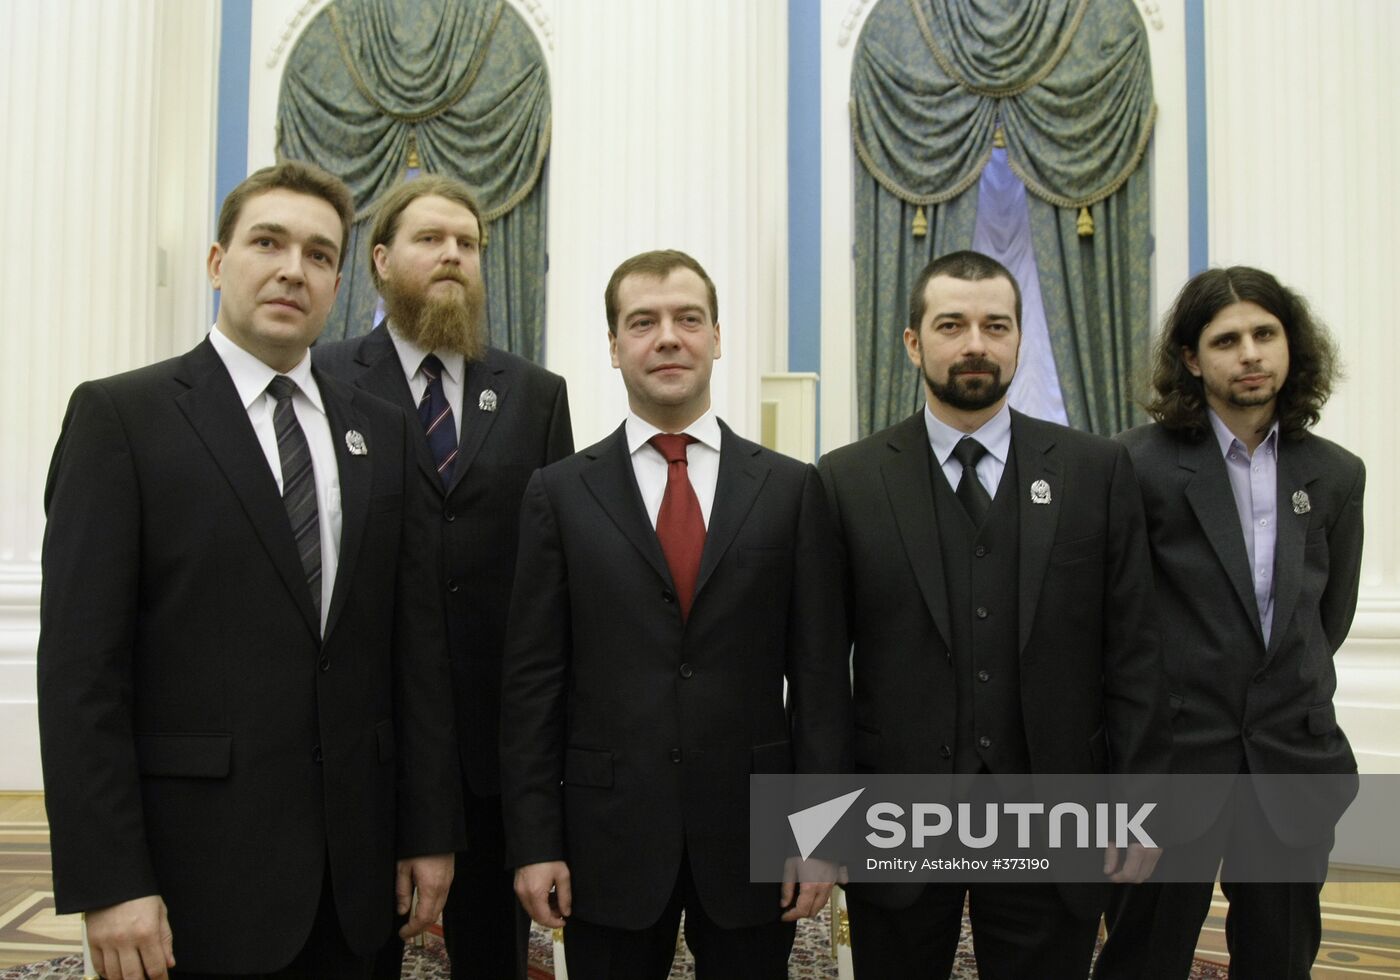 Dmitry Medvedev handing prizes to young scientists